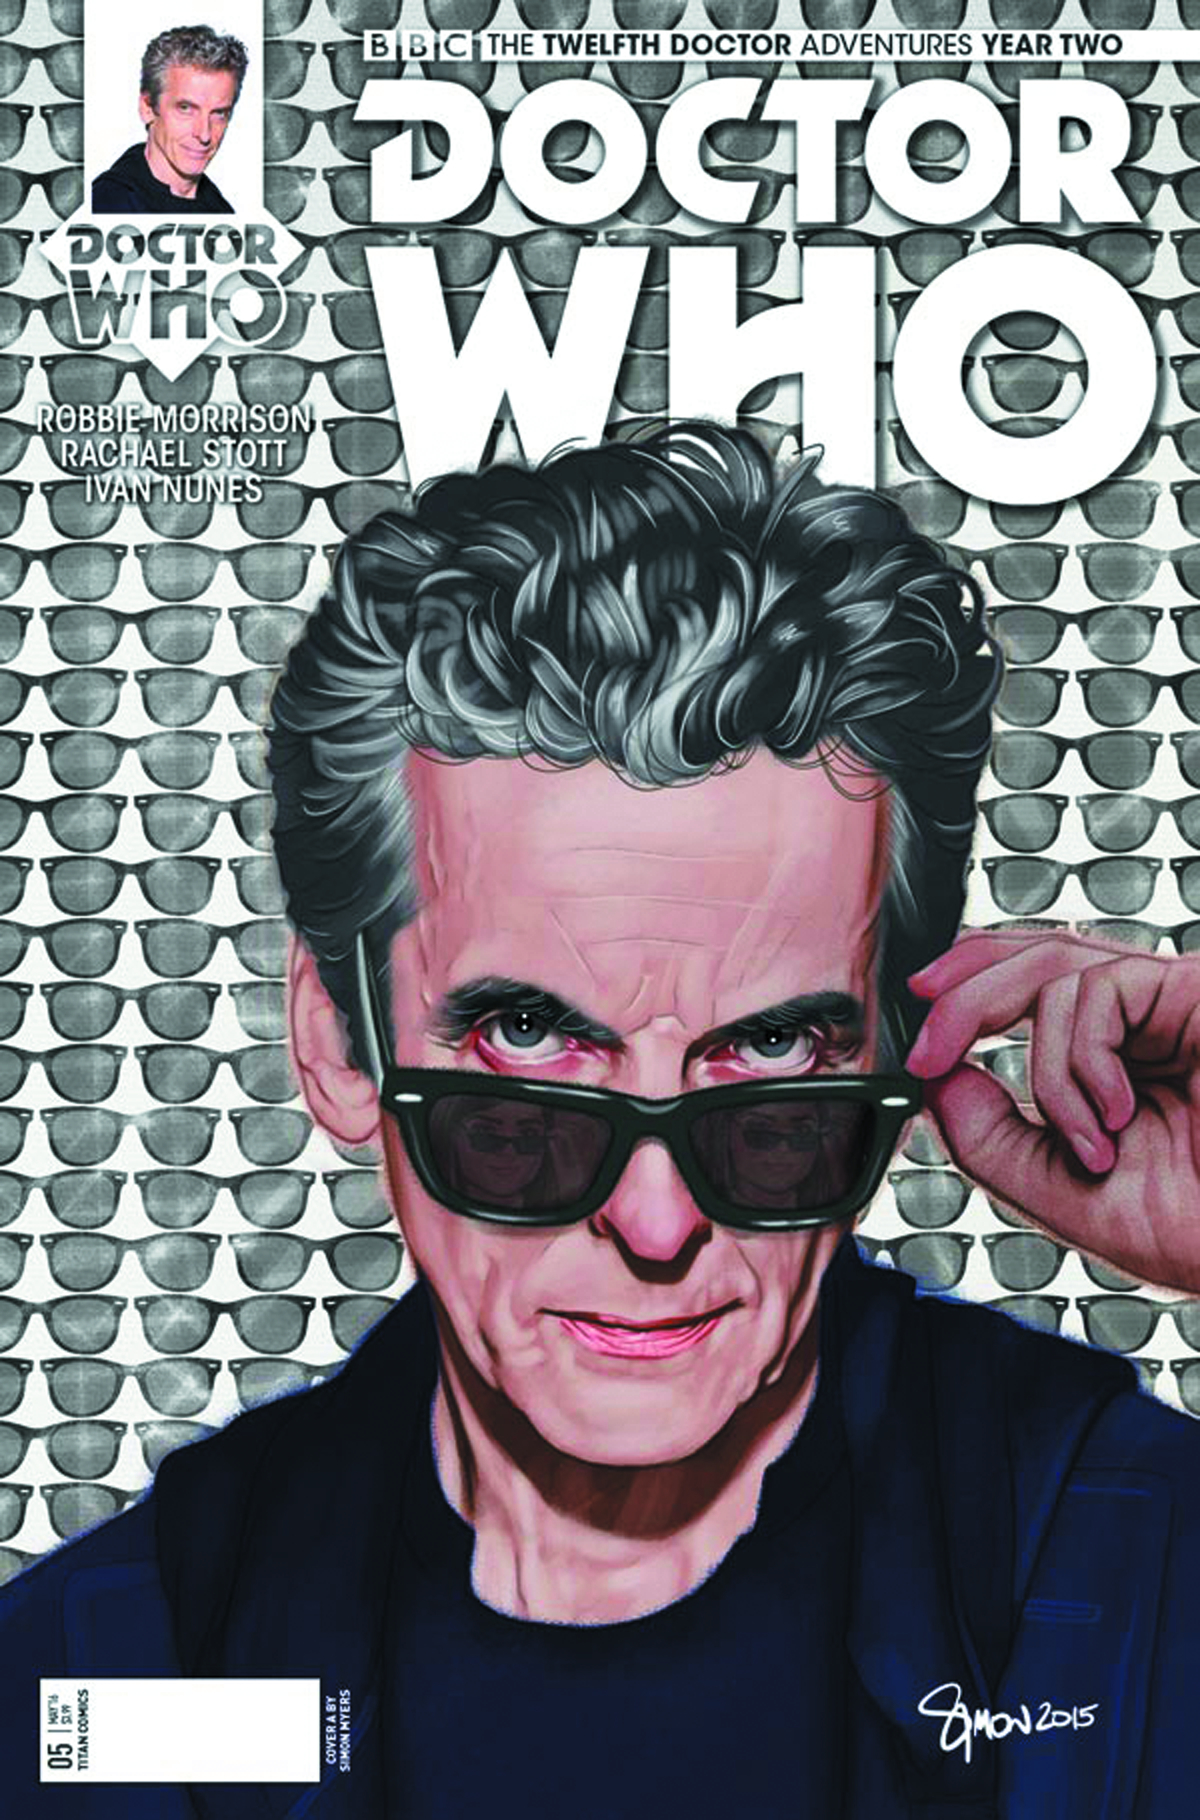 DOCTOR WHO 12TH YEAR TWO #5 CVR A MYERS